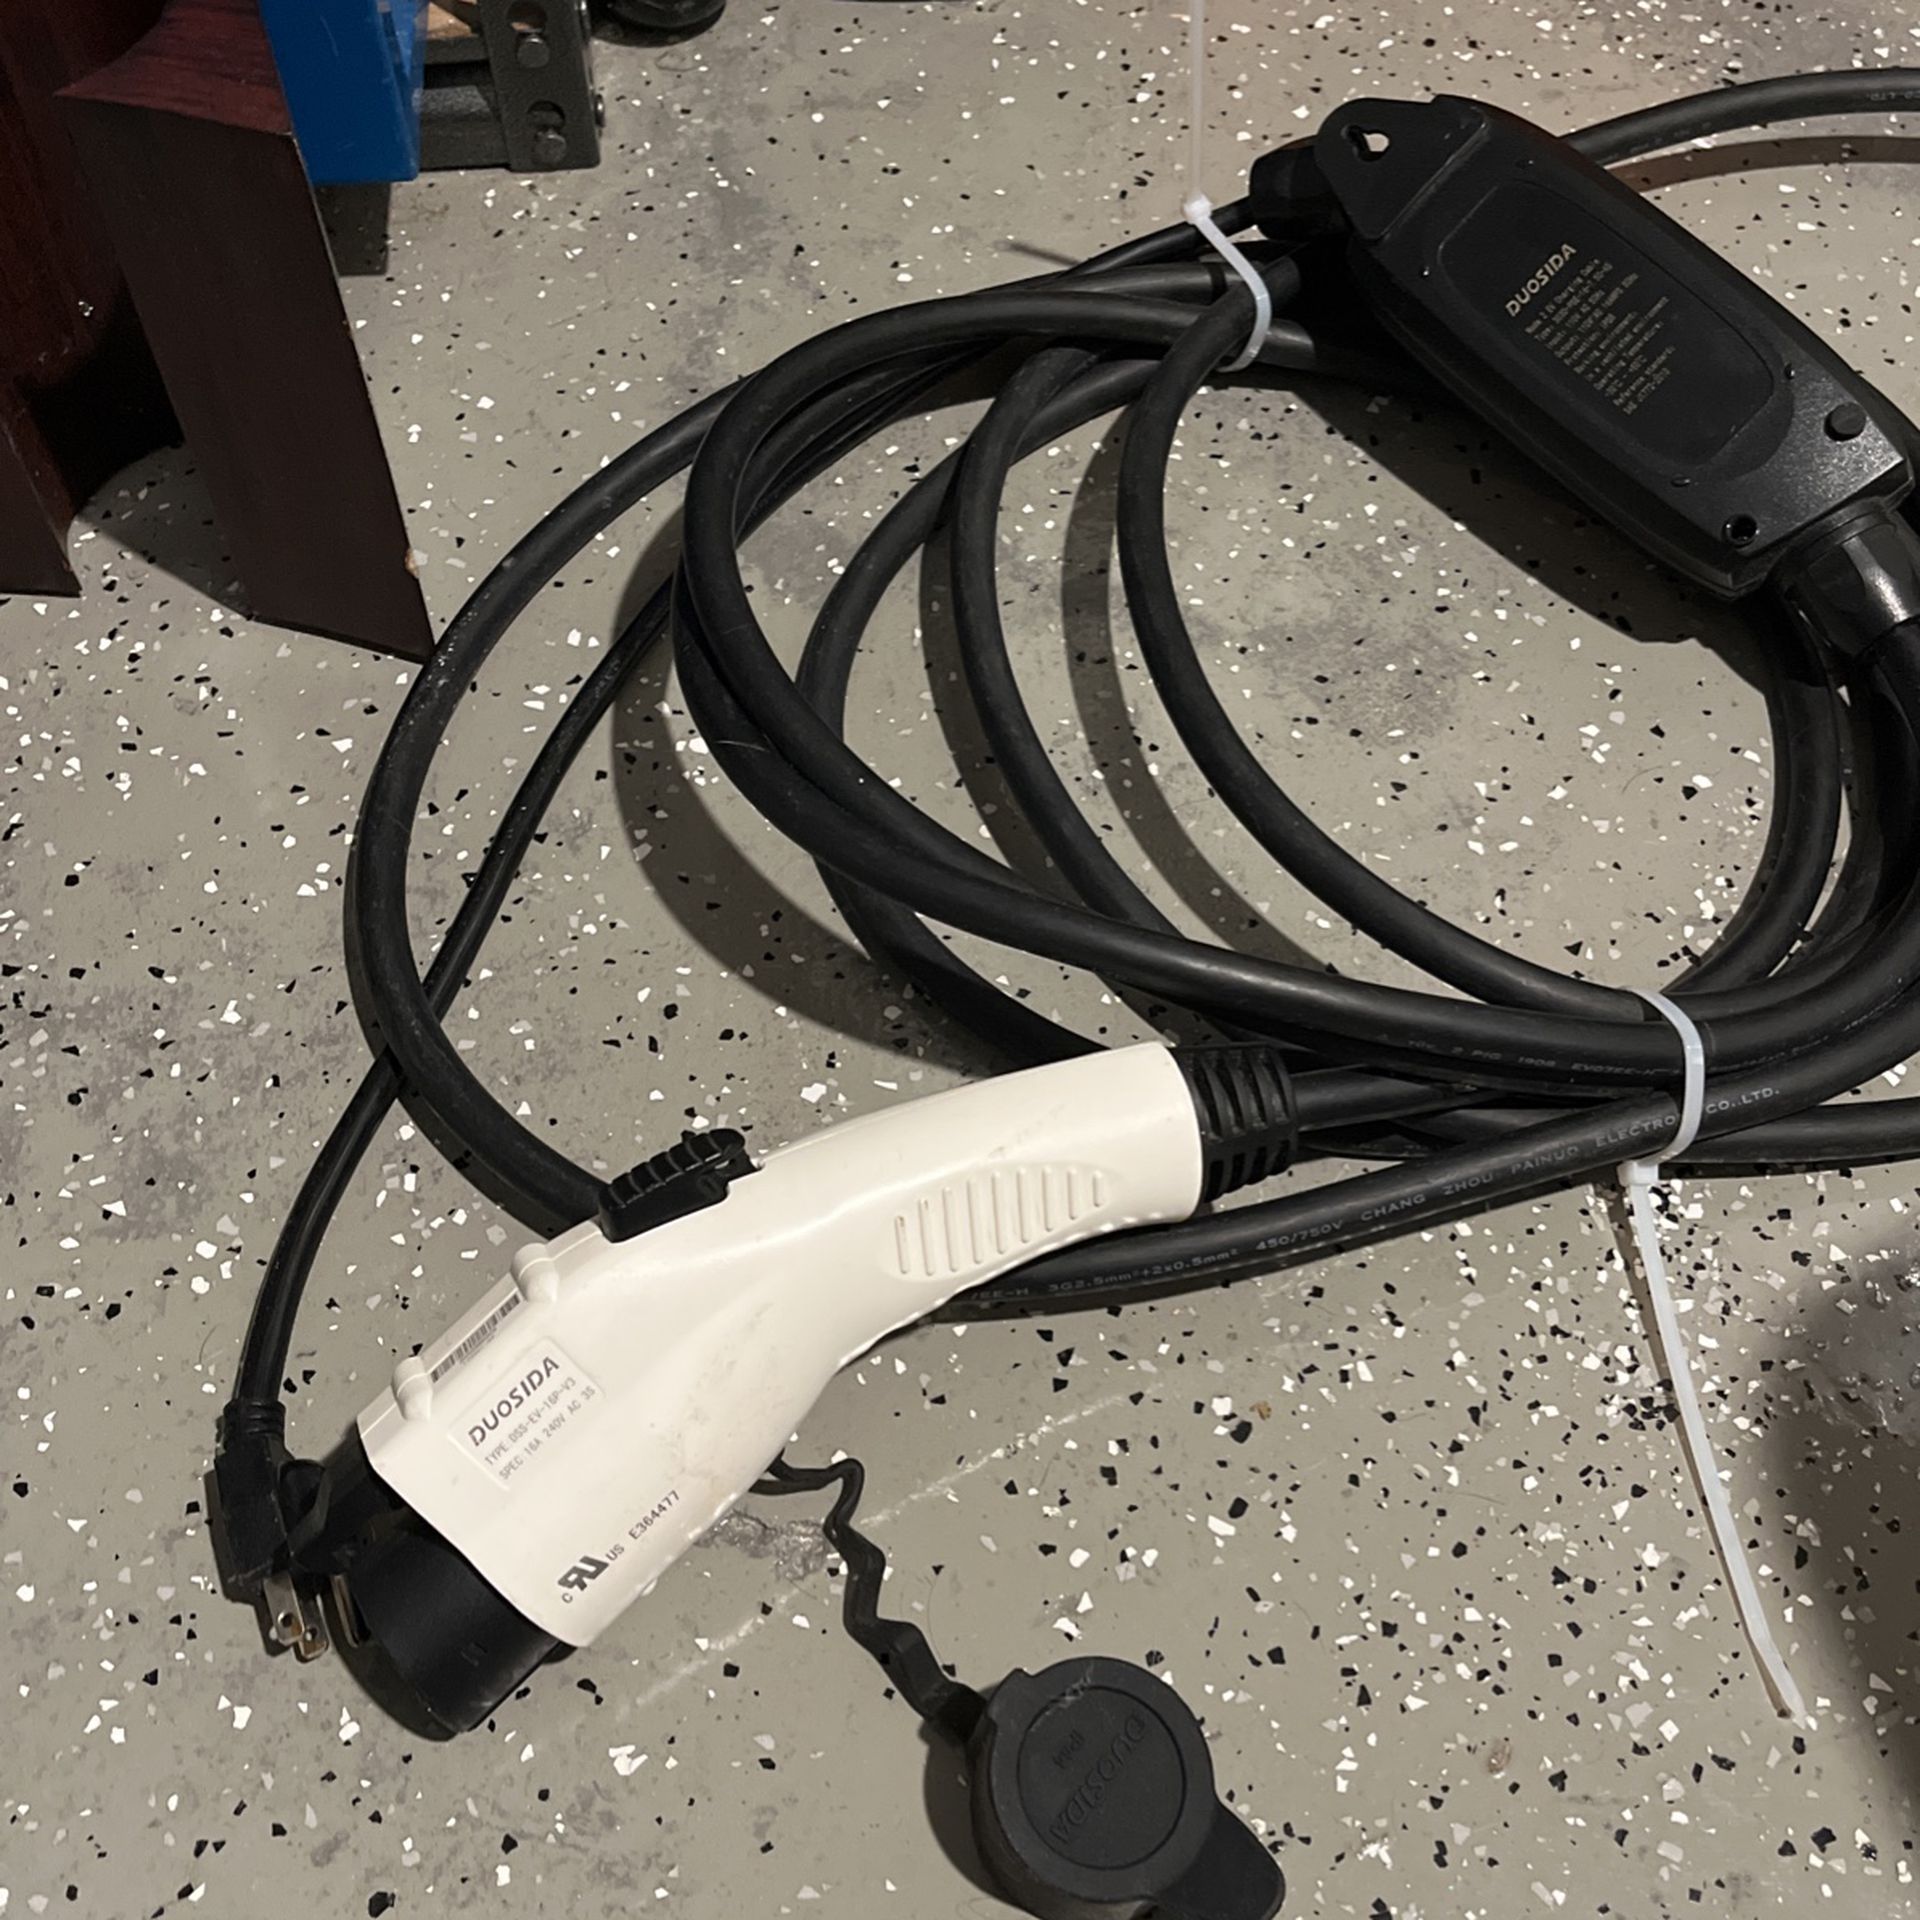 Electric Car Charger 